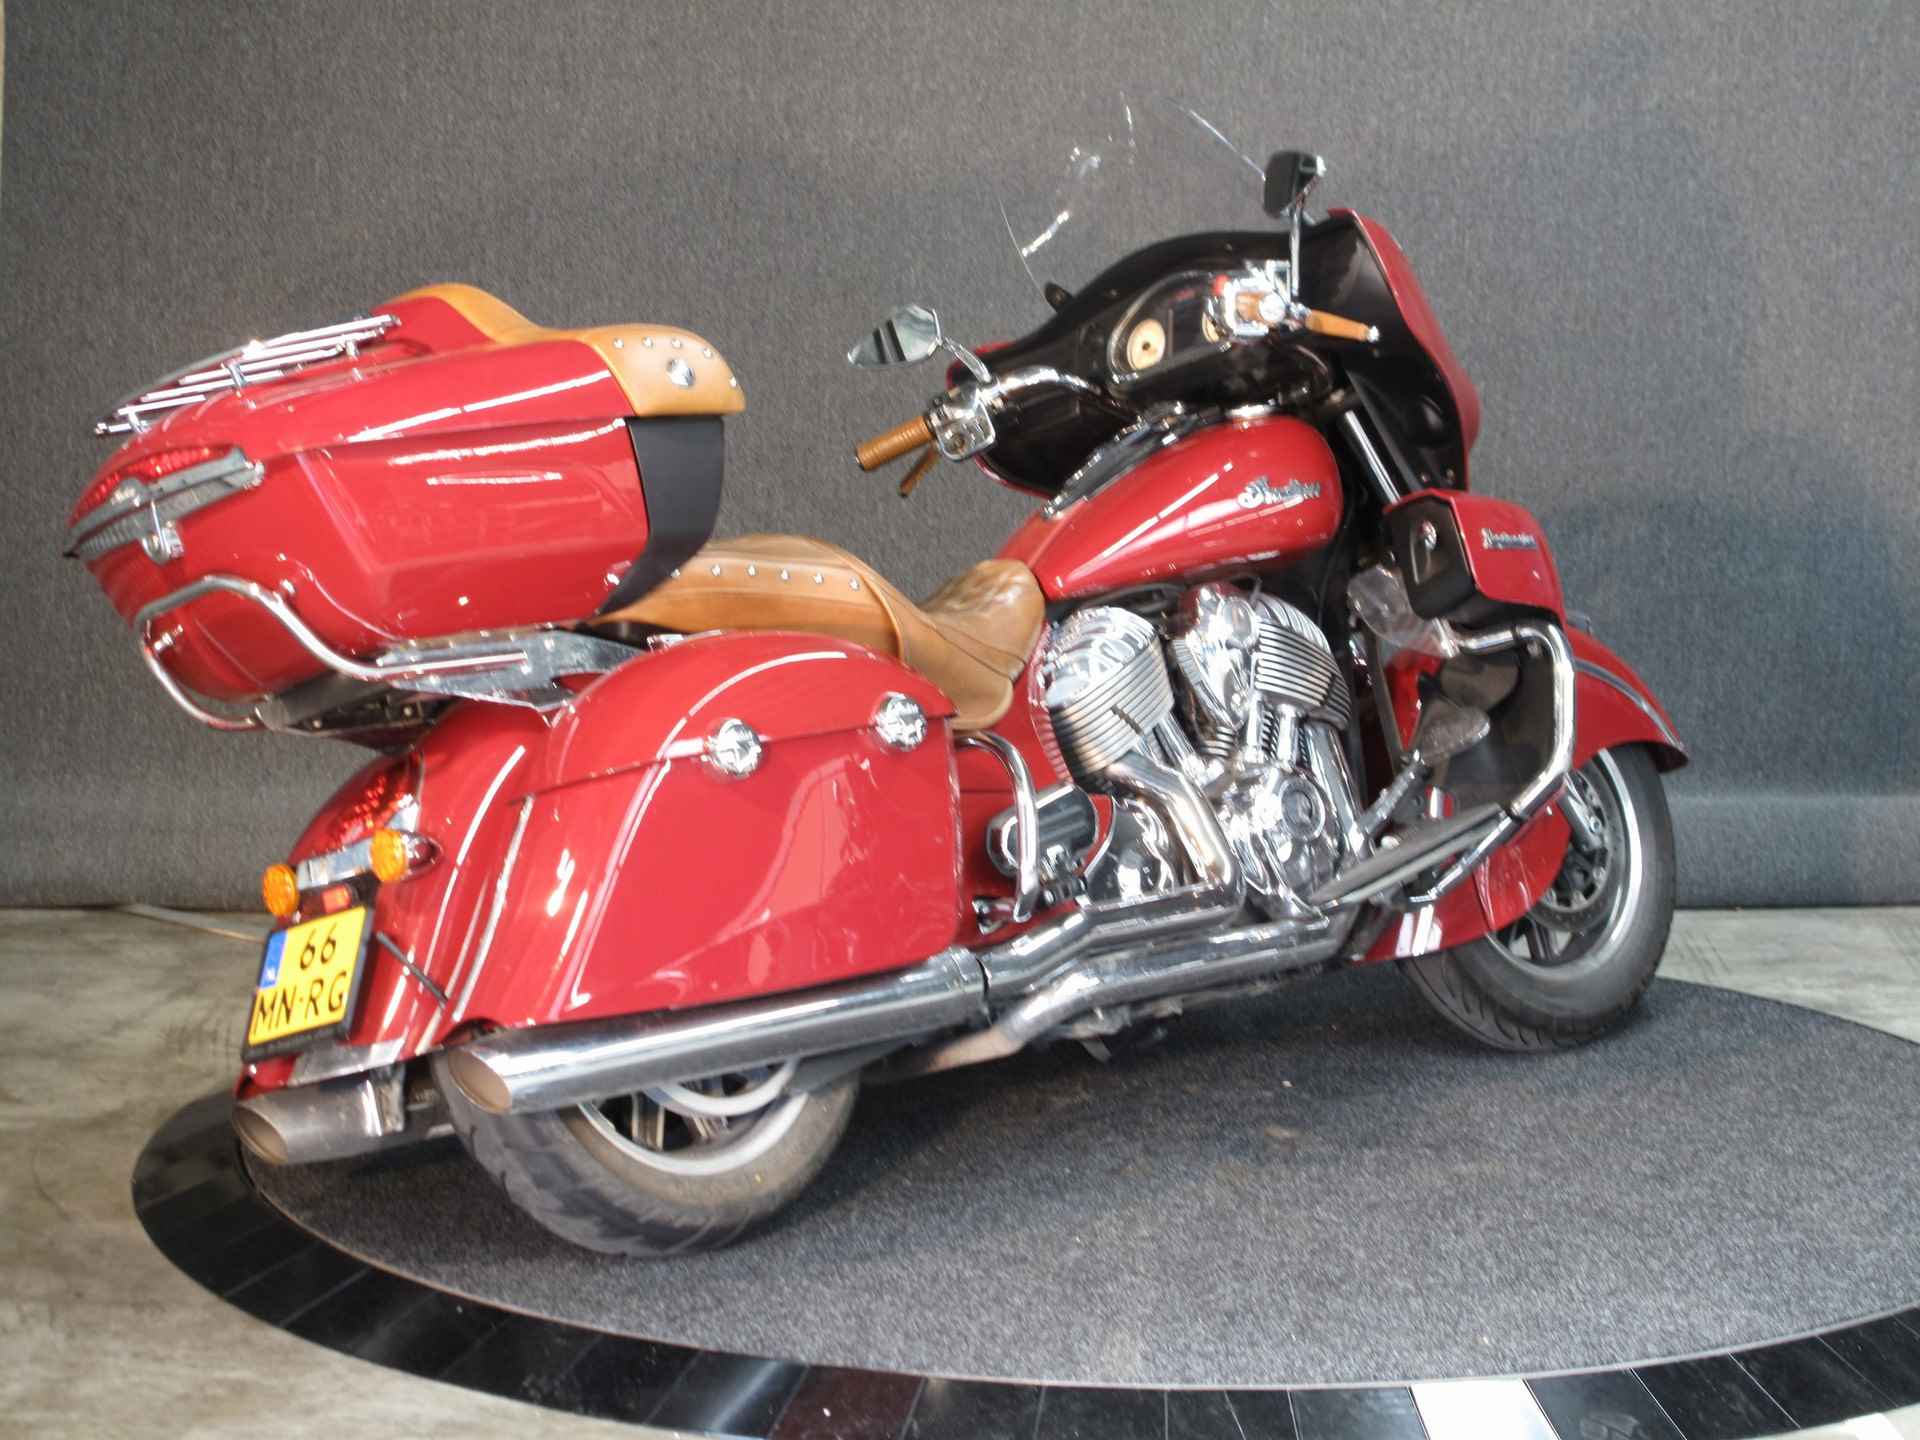 Indian Roadmaster The official Indian Motorcycle Dealer - 5/13